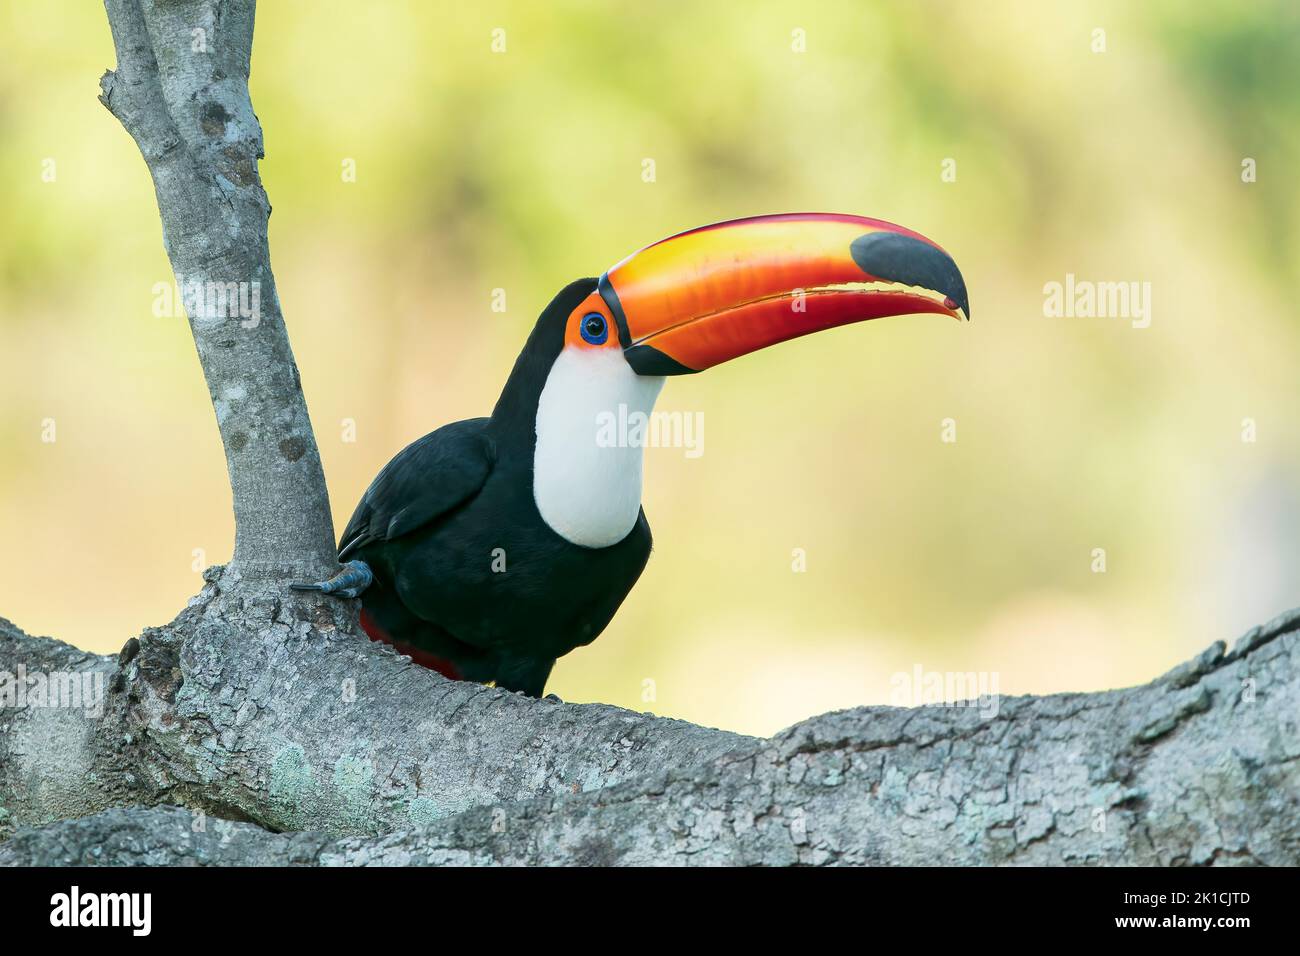 toco toucan, Ramphastos toco, single adult feeding on seed while perched in tree, Pantanal, Brazil Stock Photo